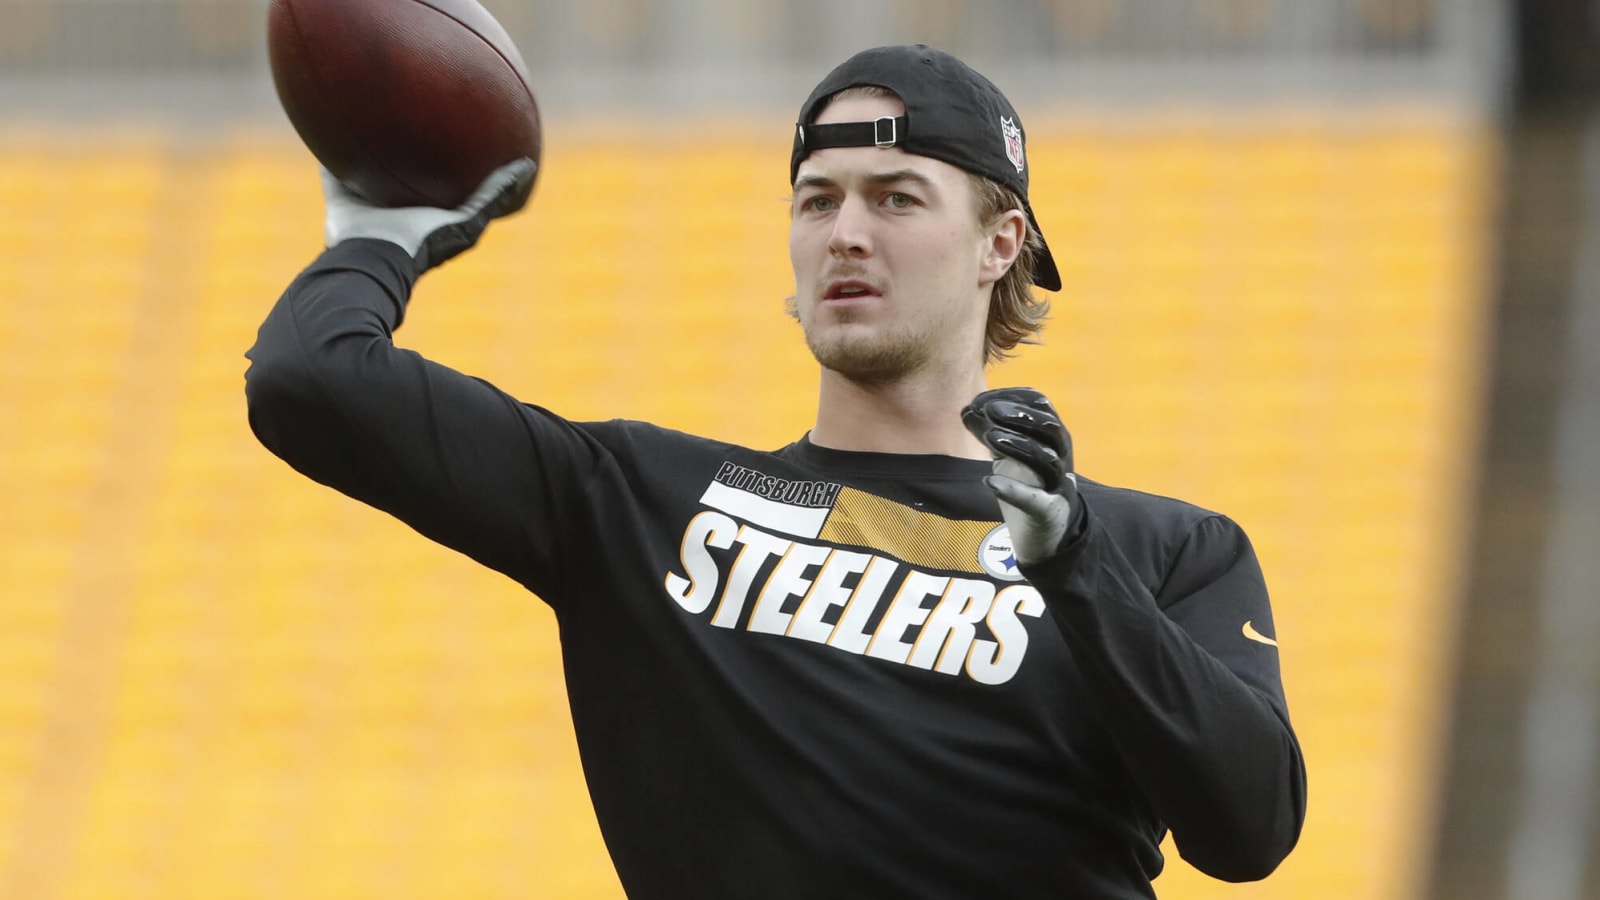 Should Steelers shut down rookie QB Kenny Pickett following second concussion?